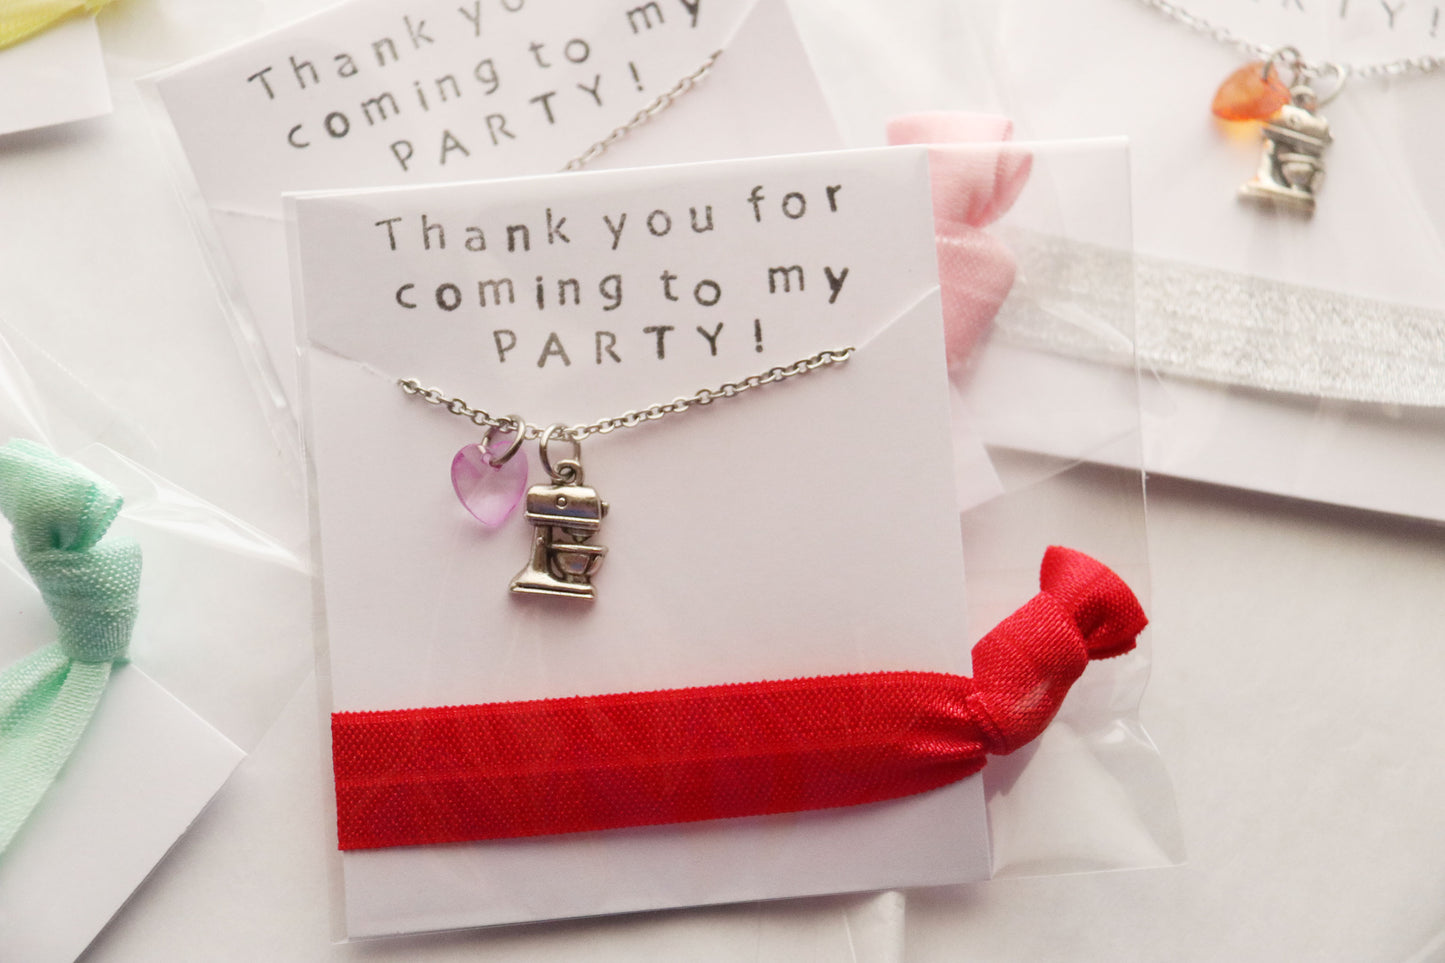 Baking Party Favor Necklace with Hair Tie, Cooking Party Favor, Cupcake Party Favor, Party Favors